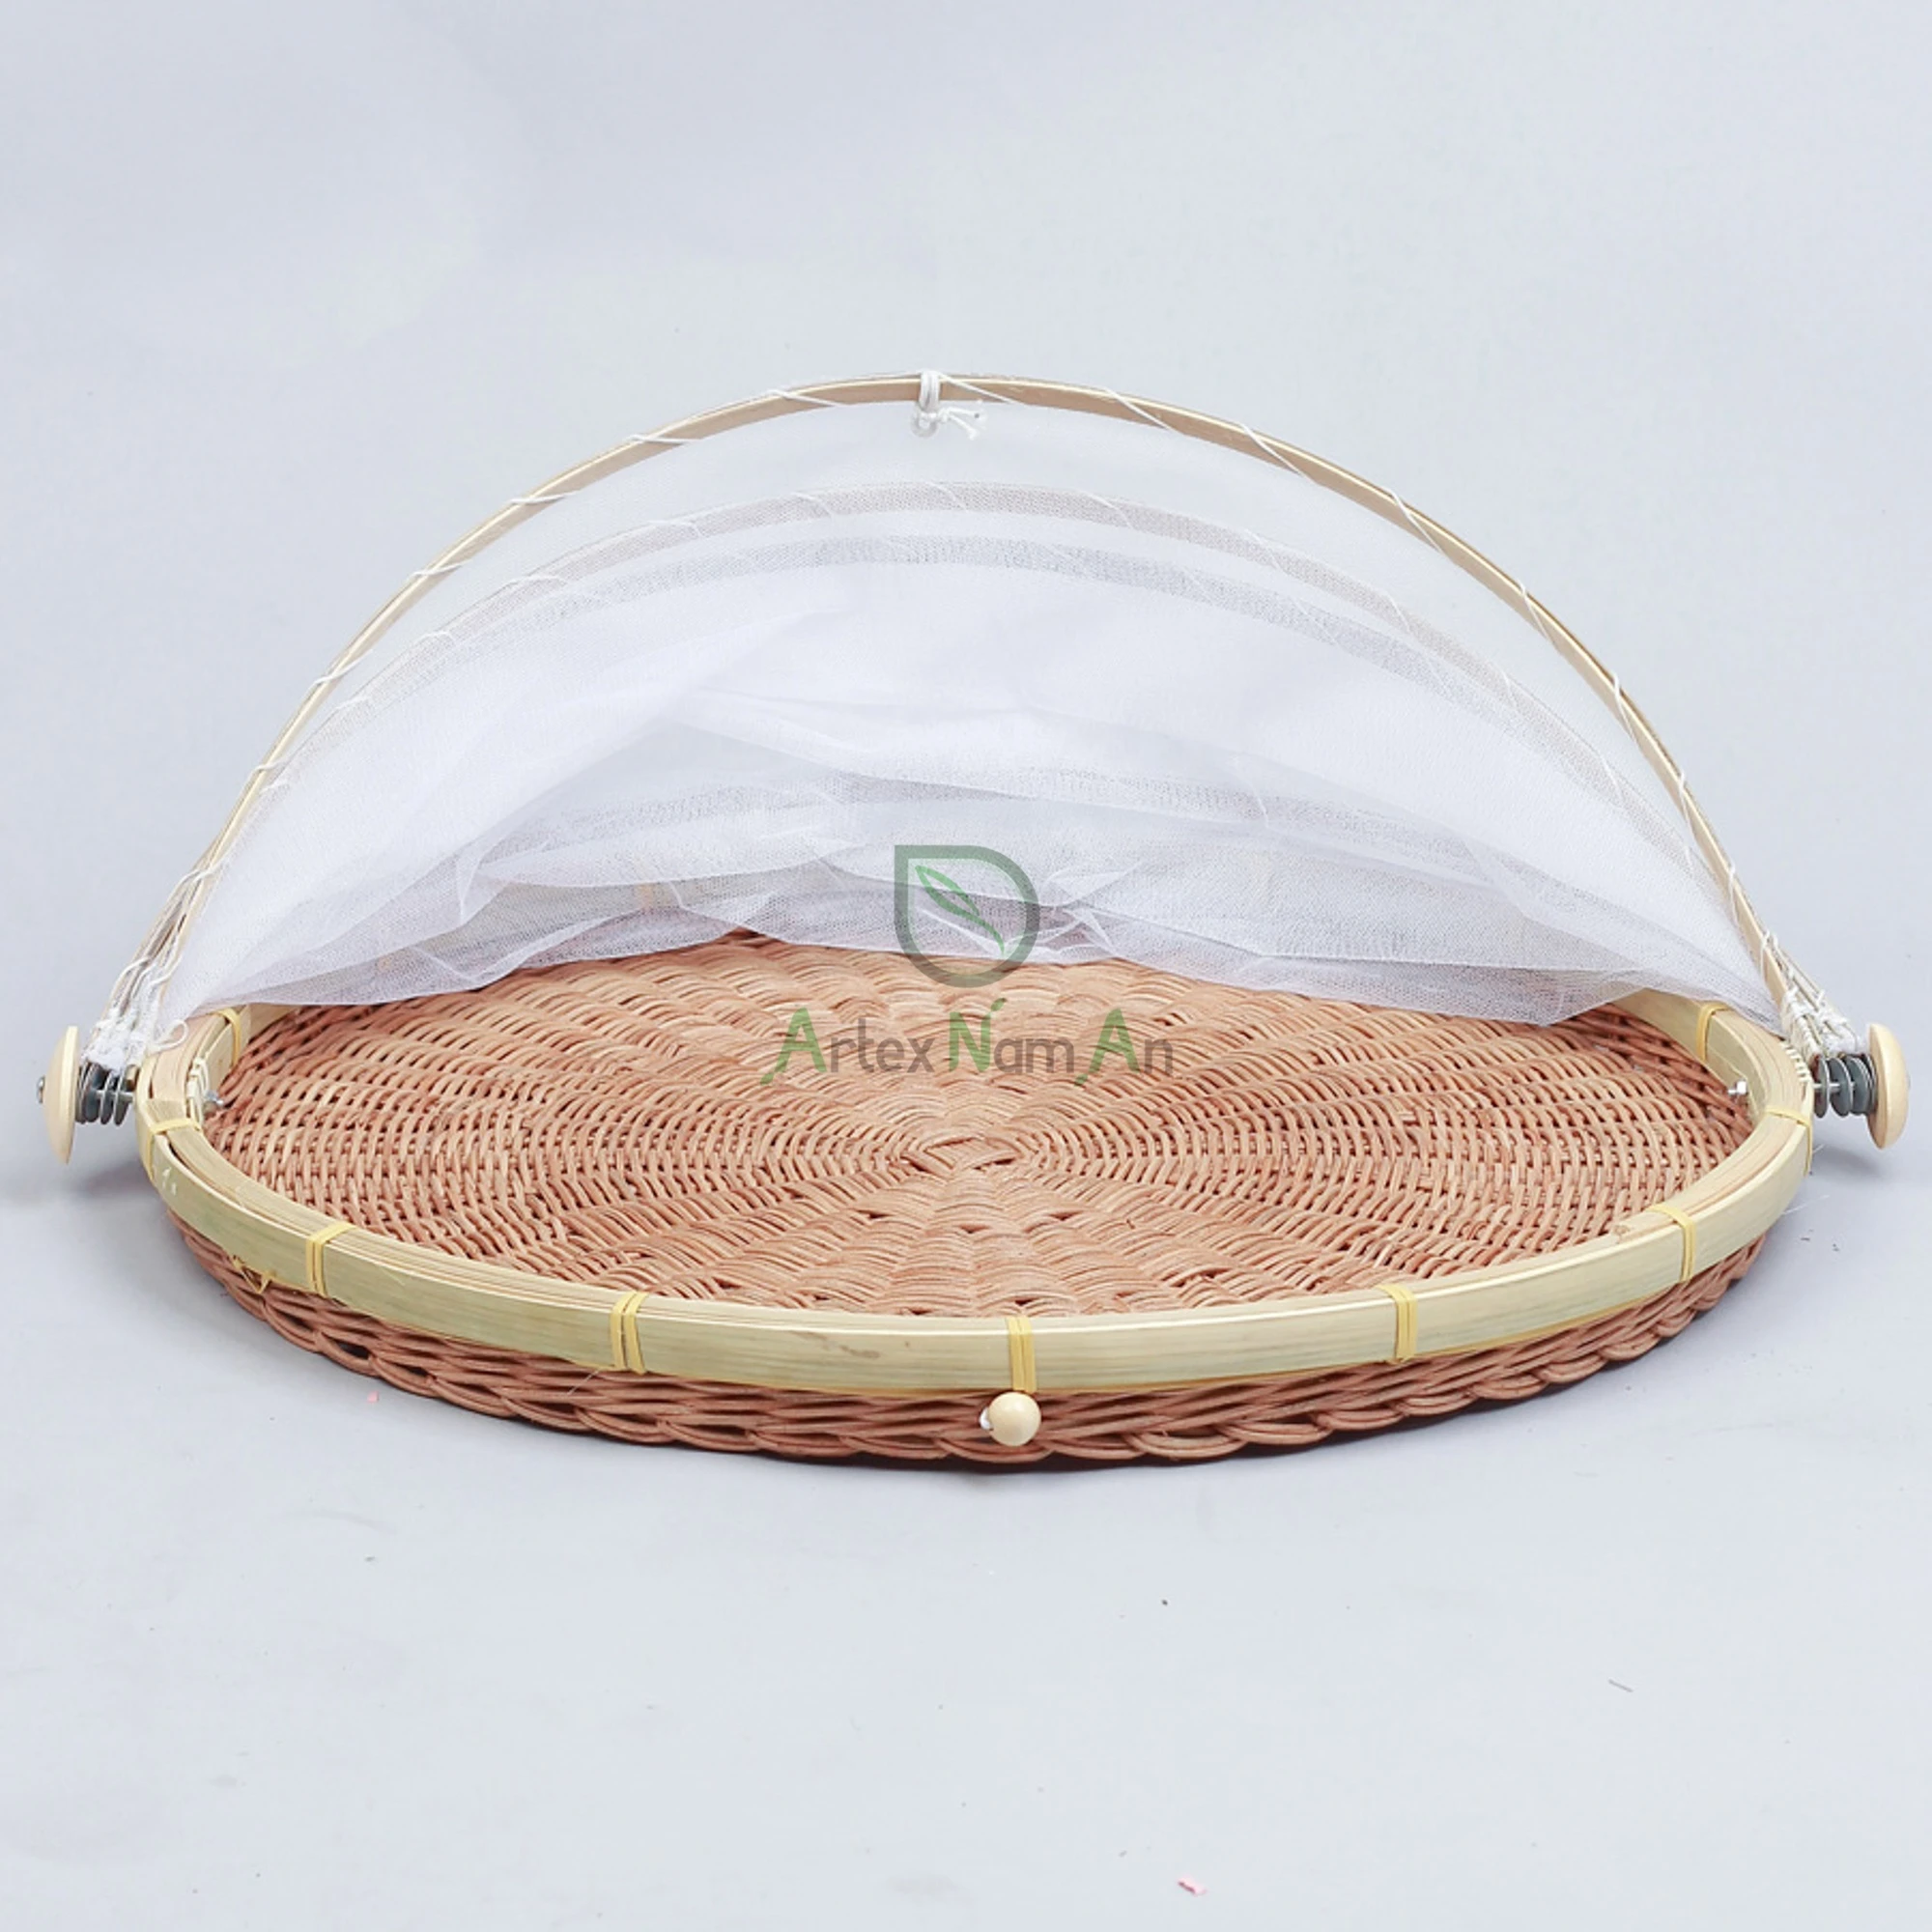 Vietnam wholesale natural woven bamboo food serving tent basket with net cover, round handmade picnic basket with mesh cover